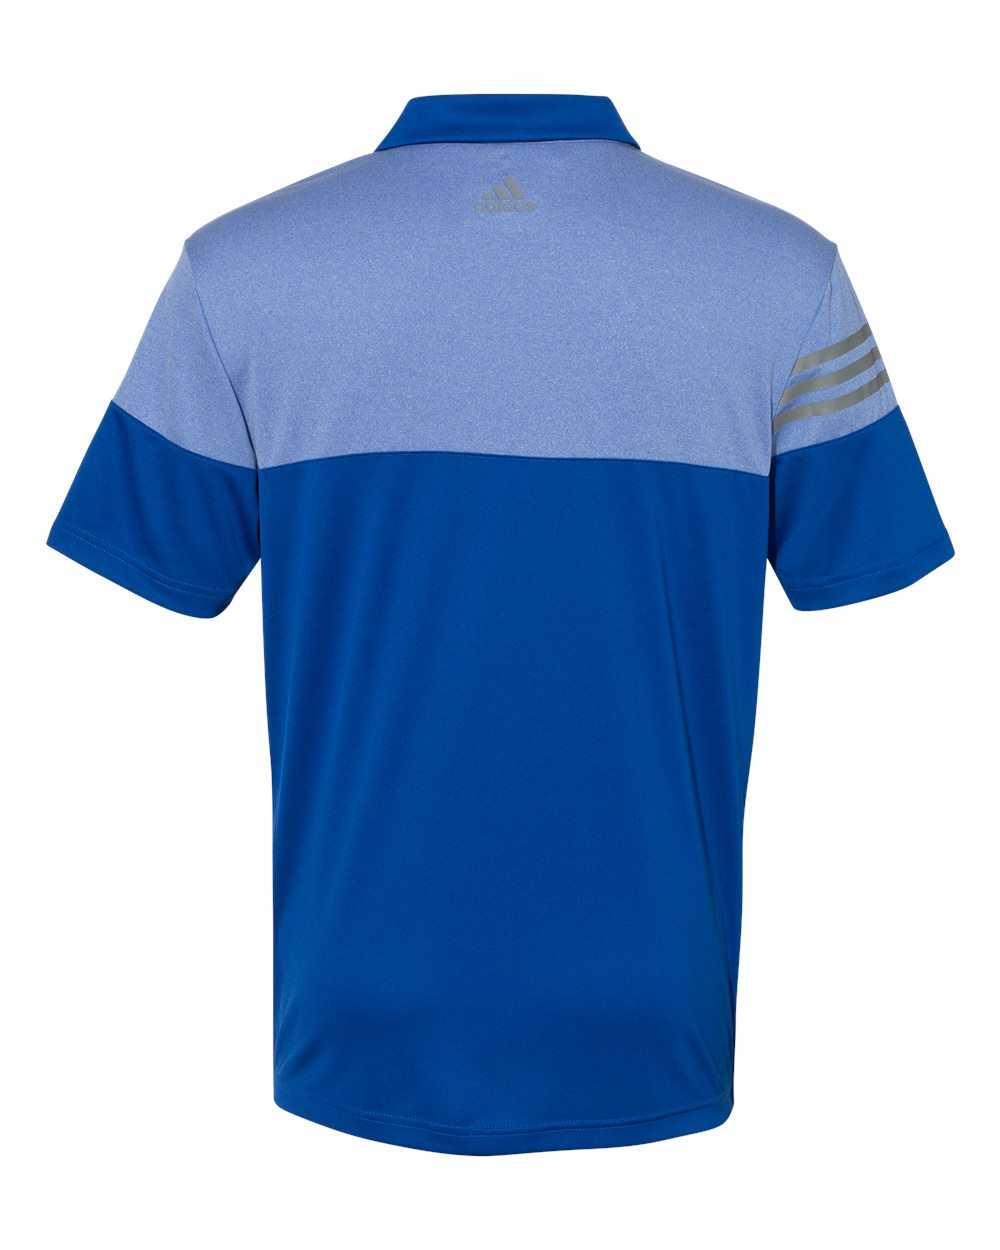 Adidas A213 Heathered 3-Stripes Block Sport Shirt - Collegiate Royal - HIT a Double